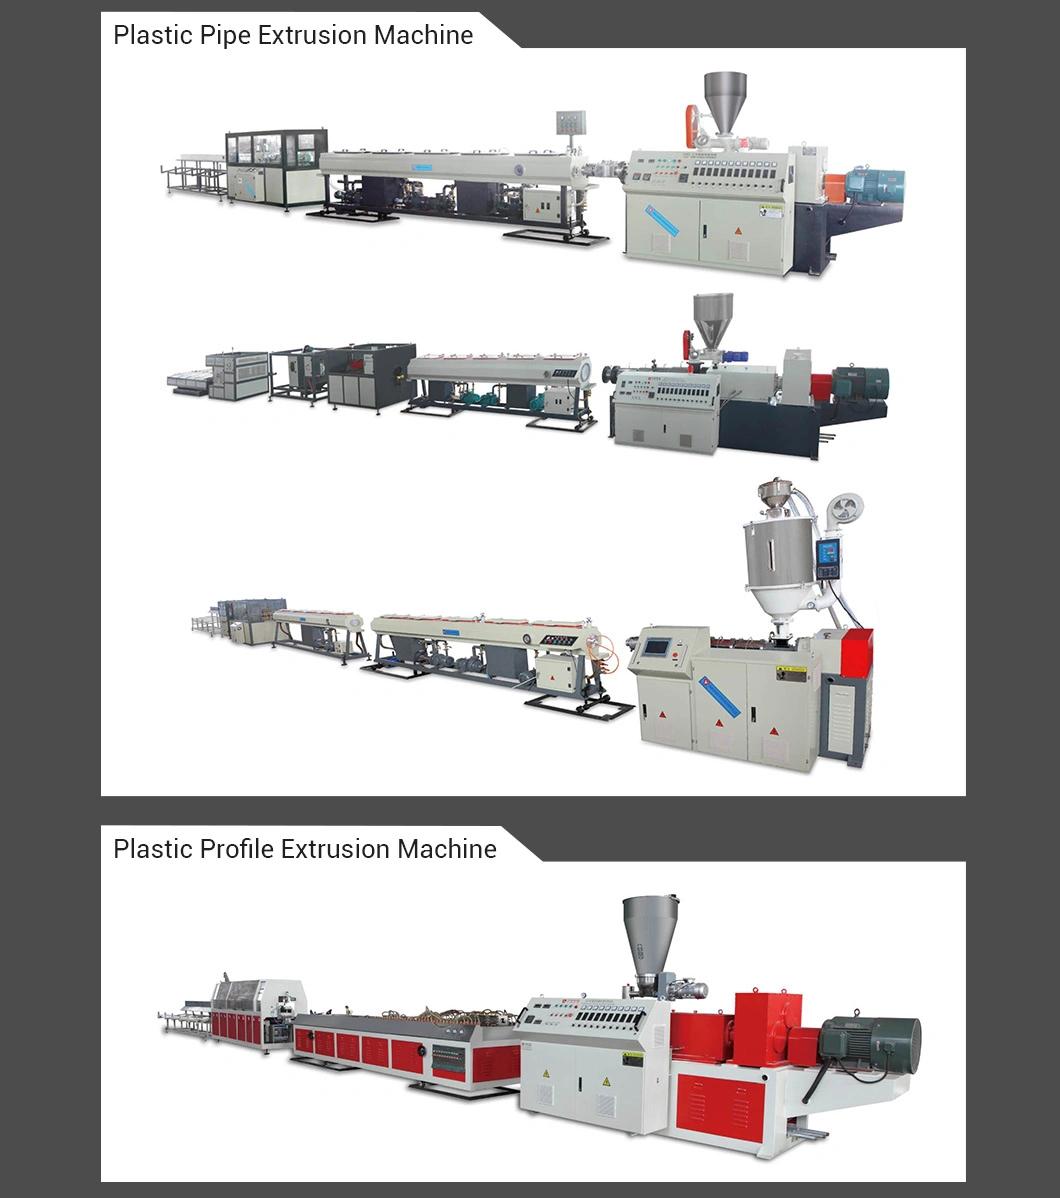 Yatong Mixed PVC CaCO3 Pipe Extrusion Line Plastic Machine